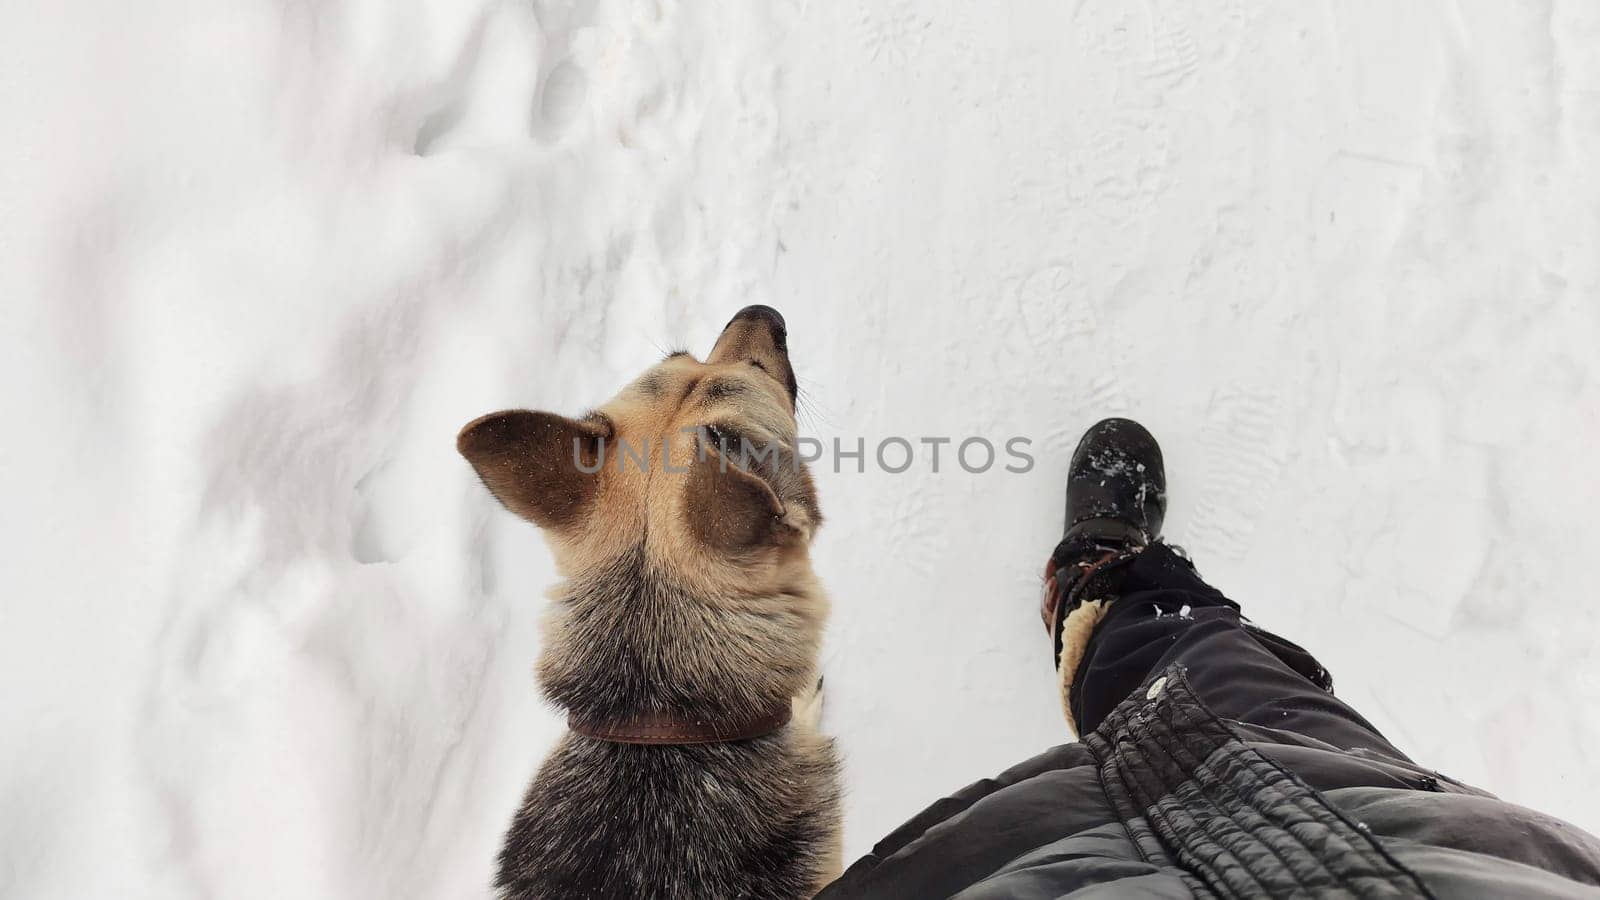 Dog German Shepherd in winter day near human who is hunter, security guard, policeman and white snow arround. Big eastern European dog veo going near to the owner hunter or policeman